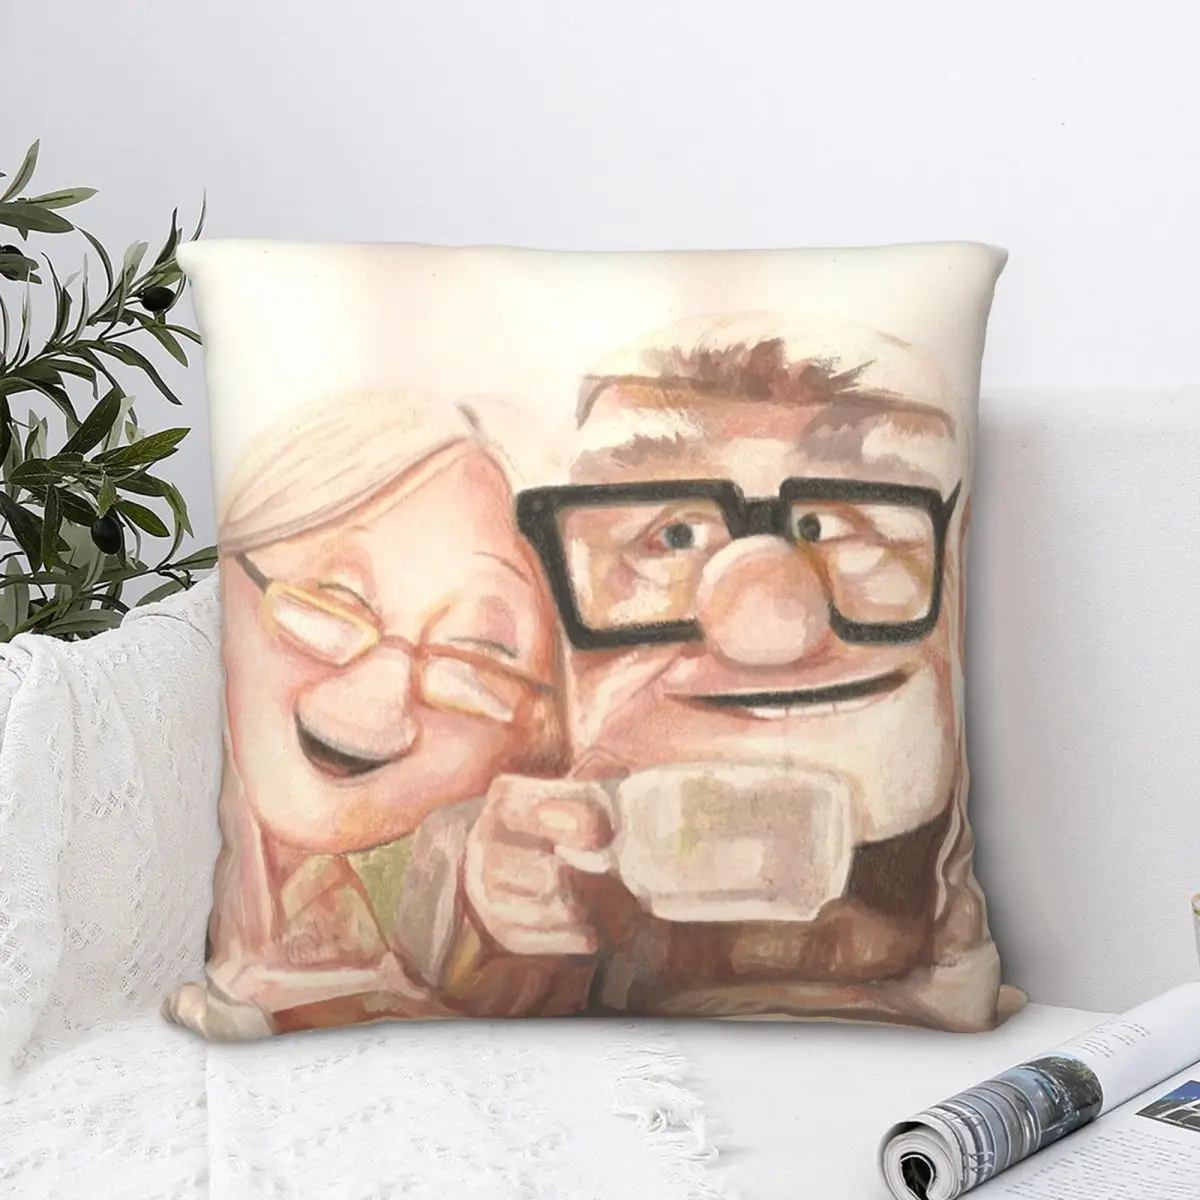 

Up Movie - Carl And Ellie Square Pillowcase Cushion Cover funny Zipper Home Decorative Polyester Pillow Case Sofa Seater Simple